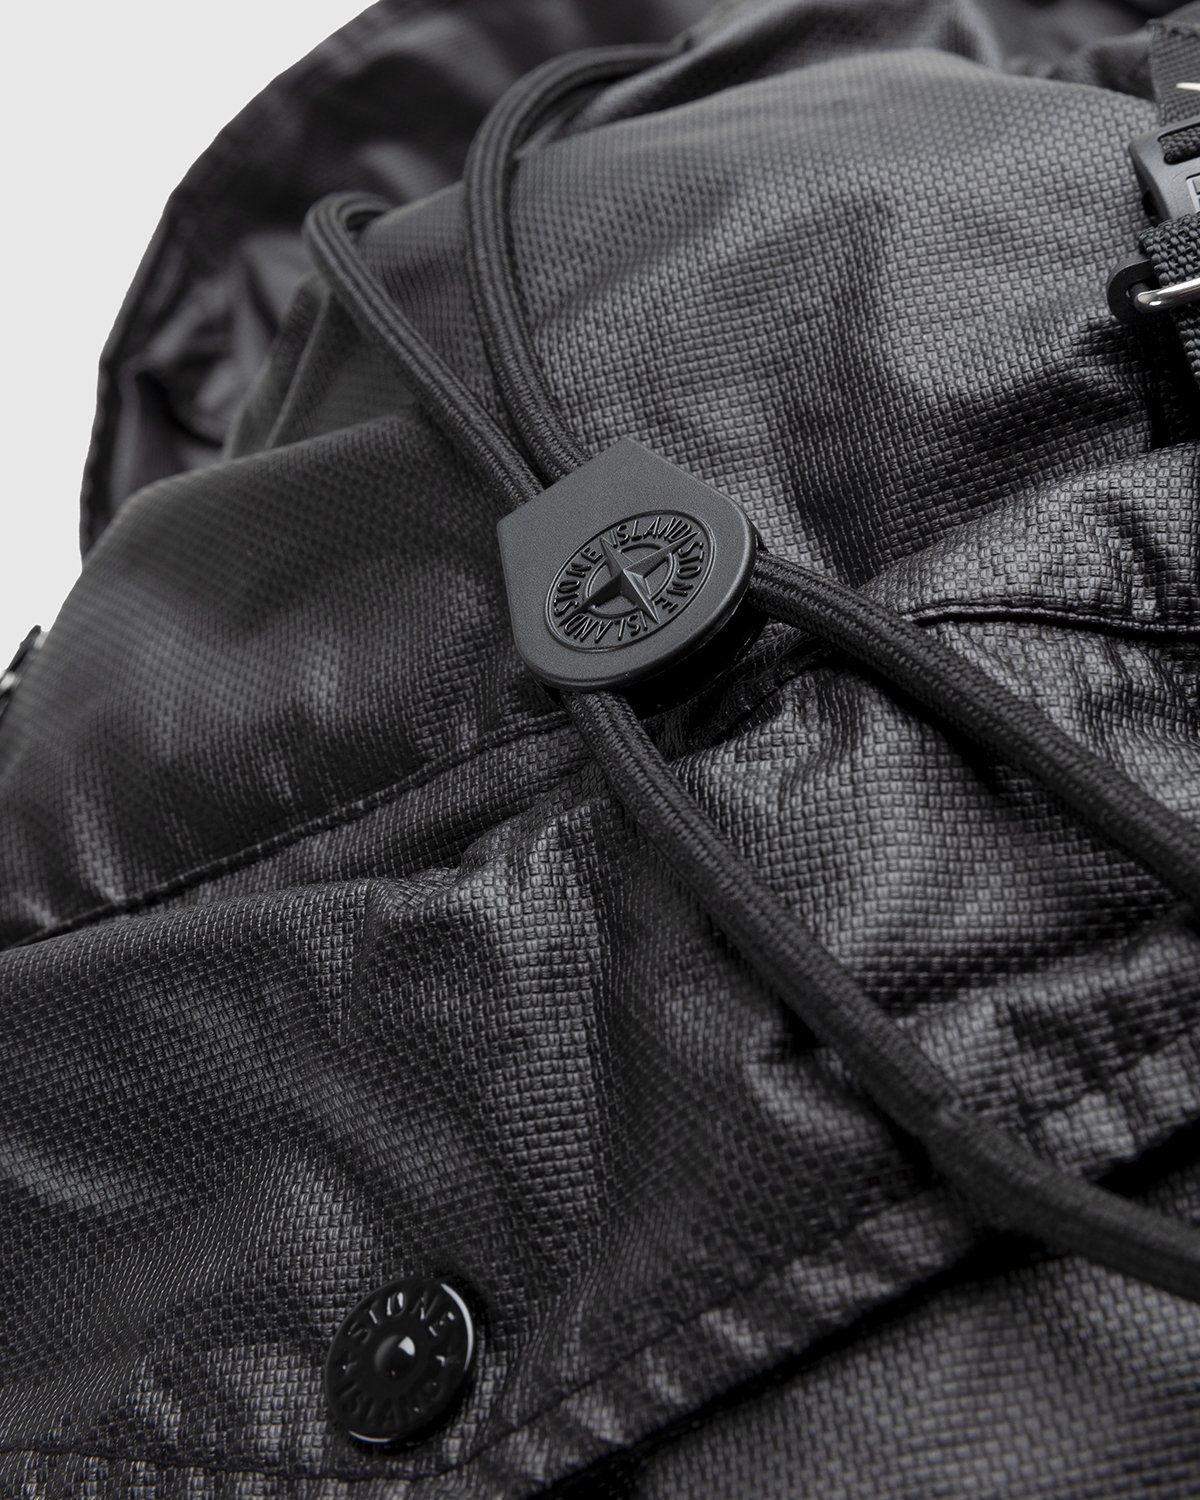 Stone Island - Dyed Backpack Black - Accessories - Black - Image 6